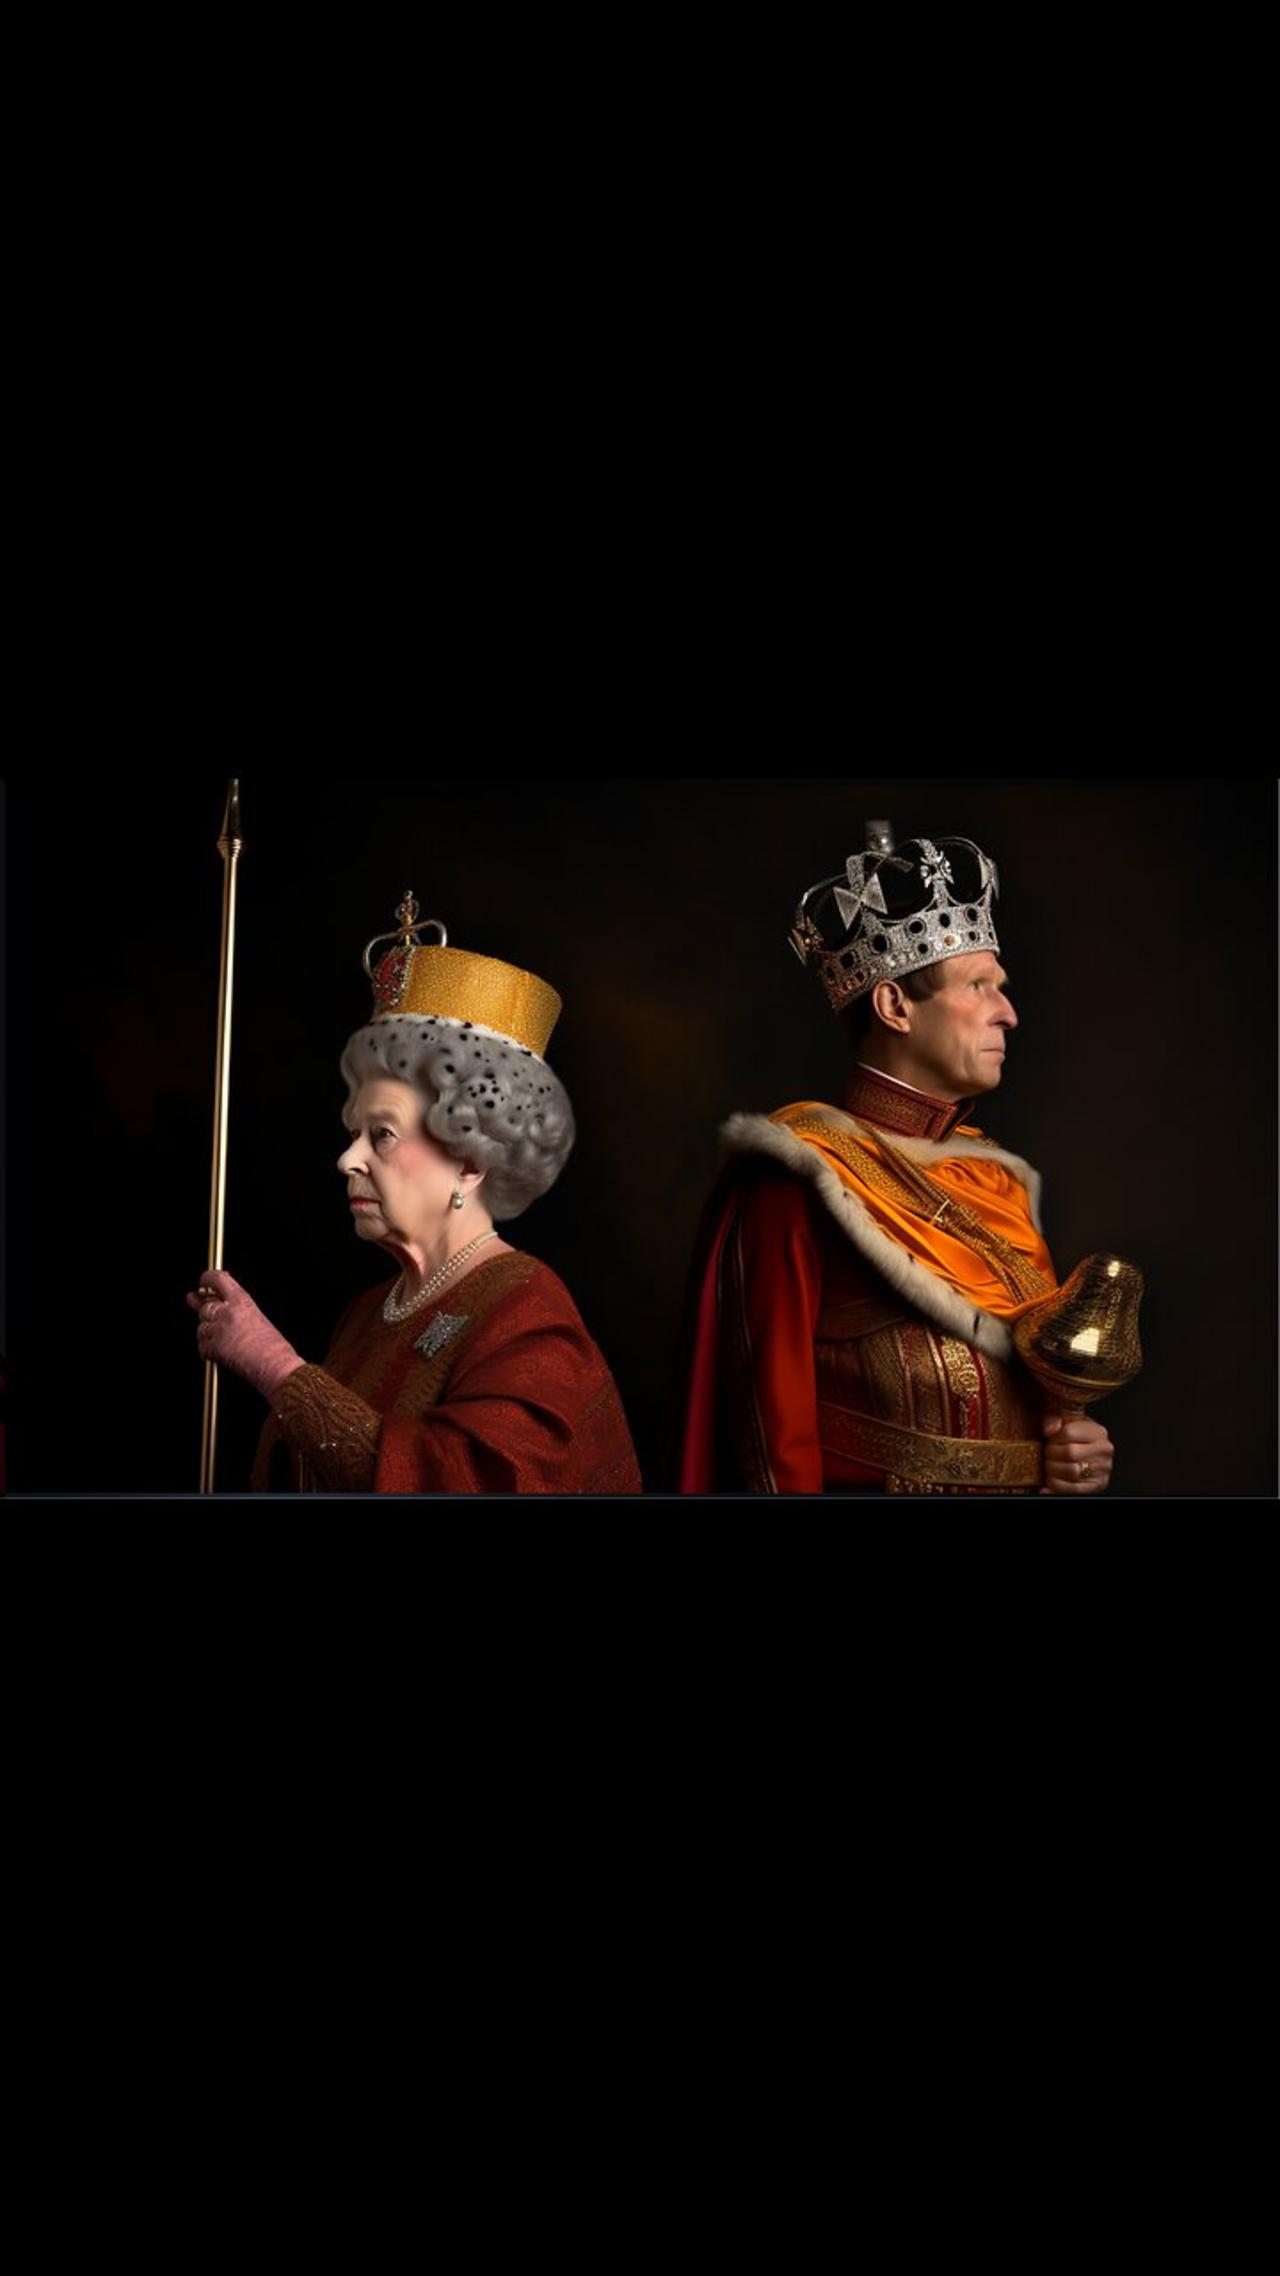 Let's Examine Economic Changes During Queen Elizabeth II and King Charles III's Reigns